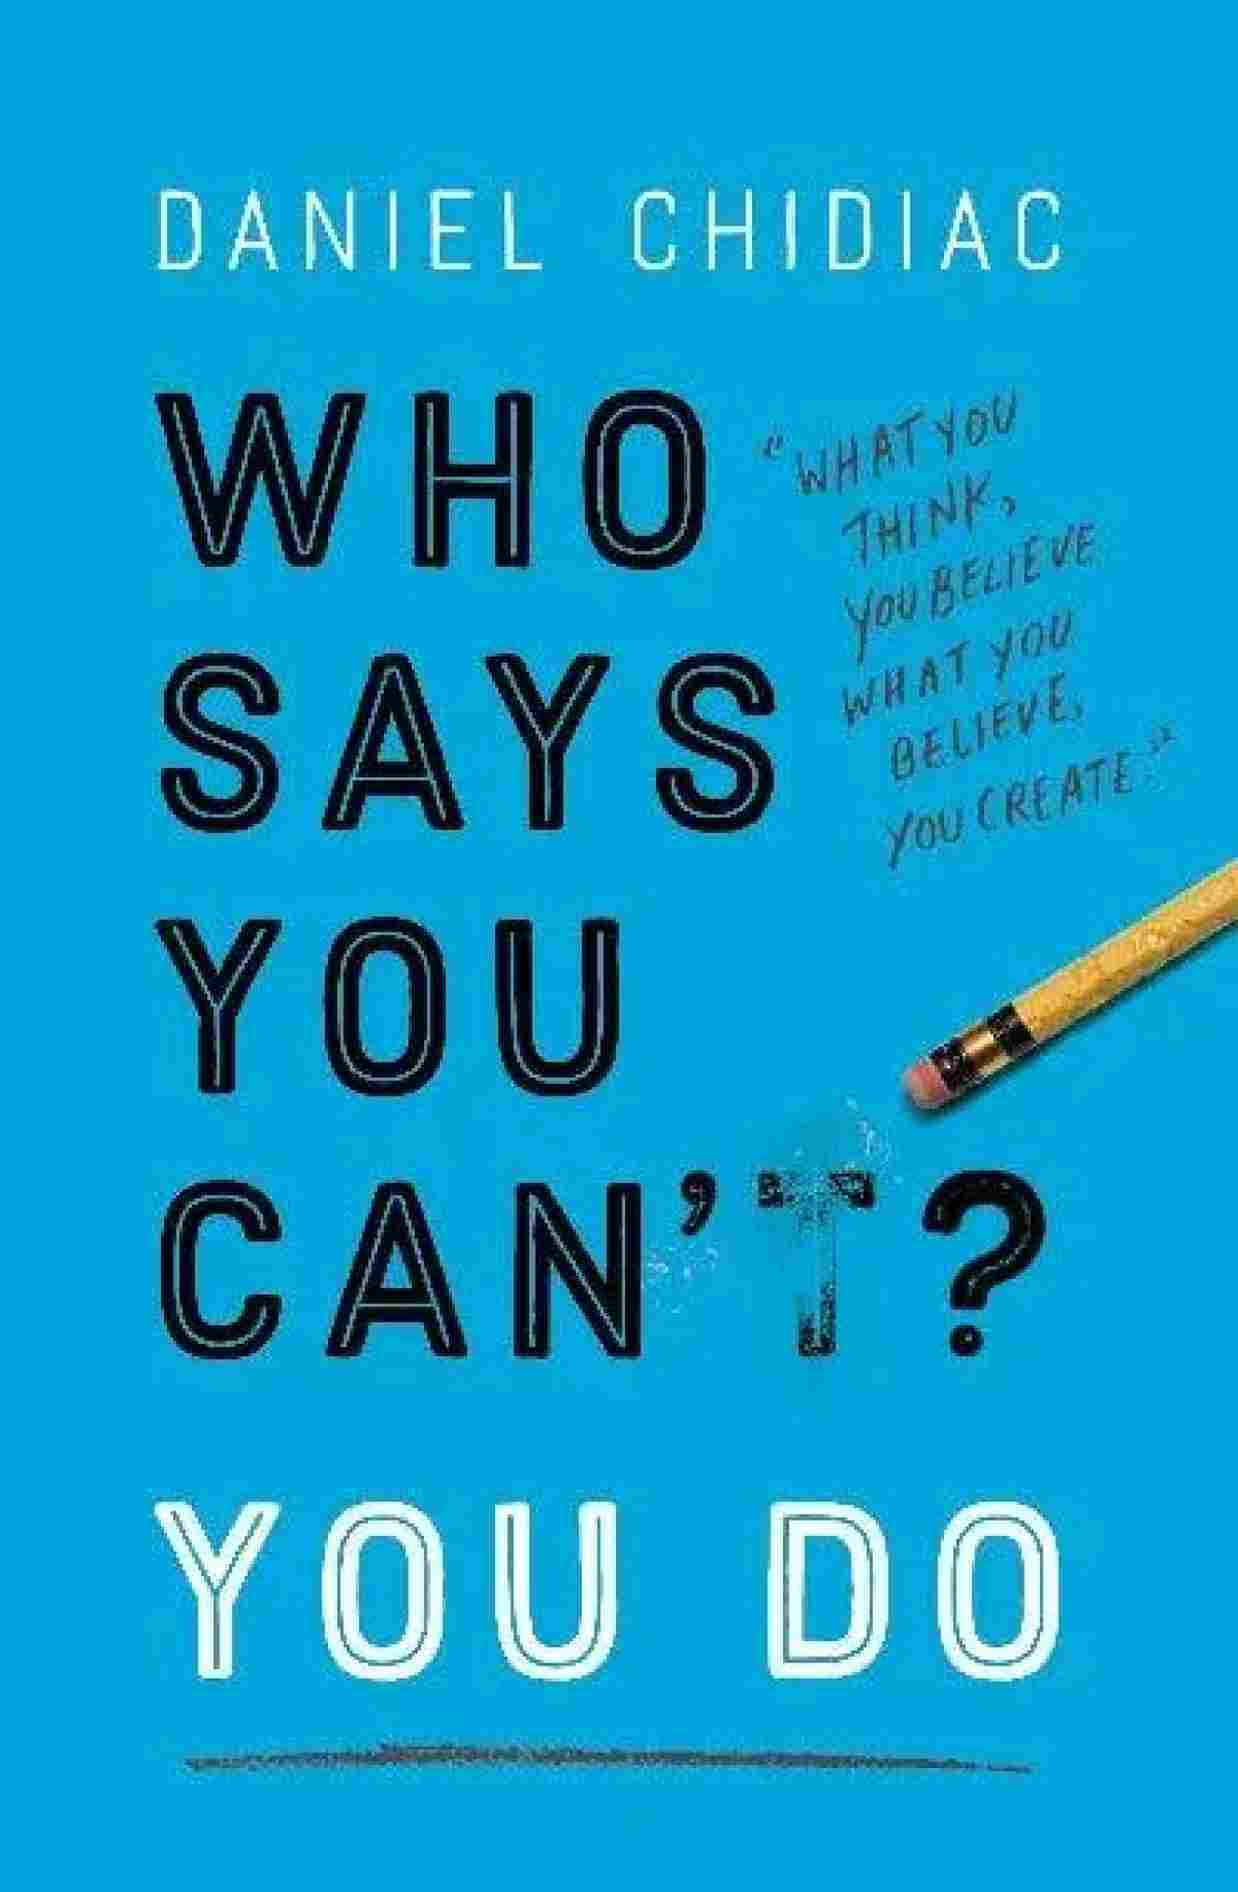 Who Says You Can’t? You Do (Paperback) - Daniel Chidiac